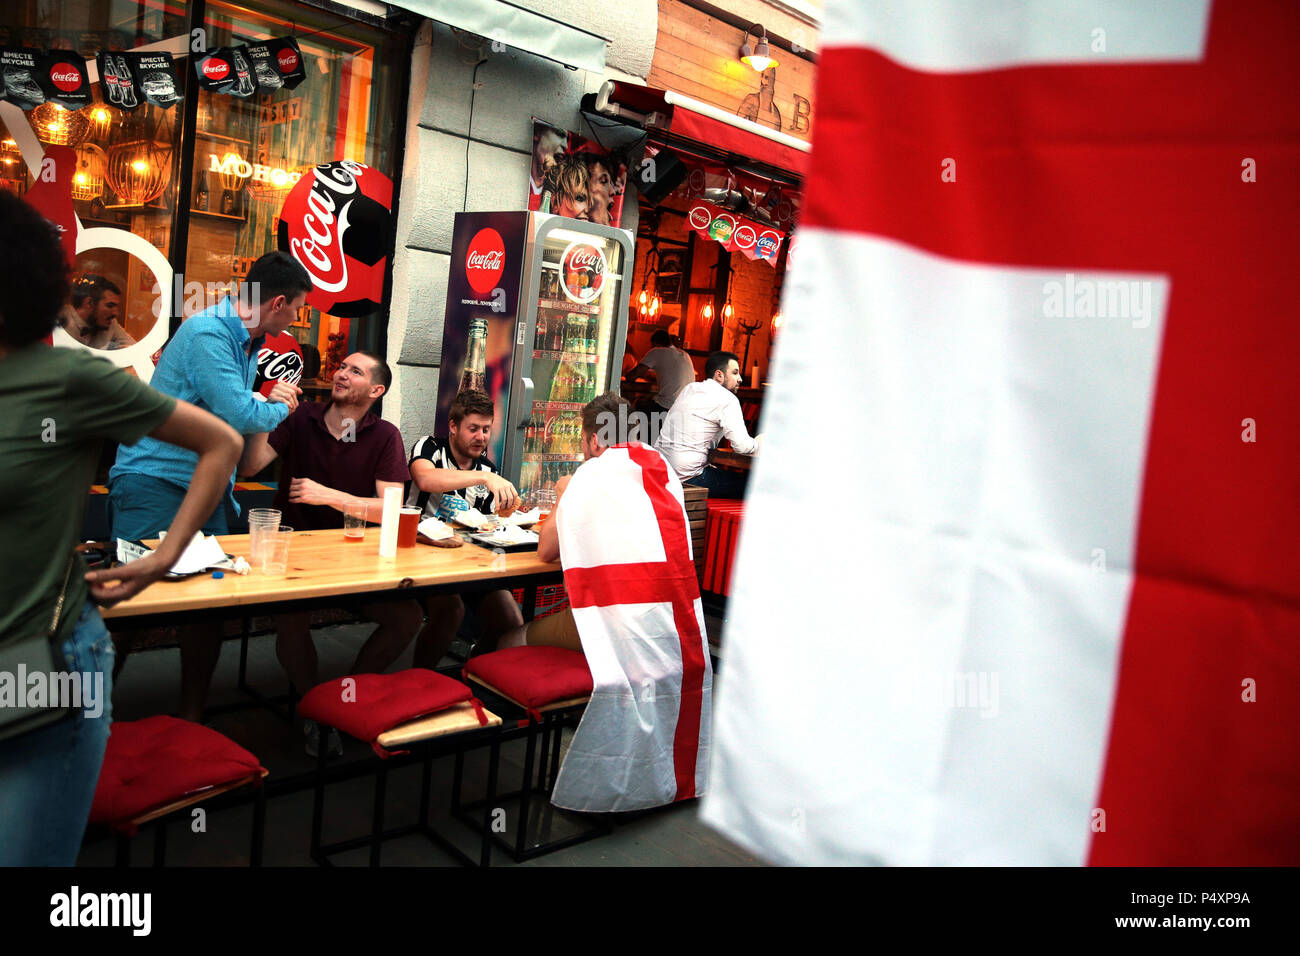 England fans in a bar in Nizhny Novgorod ahead of the match on Sunday against Panama at the 2018 FIFA World Cup in Russia. Stock Photo